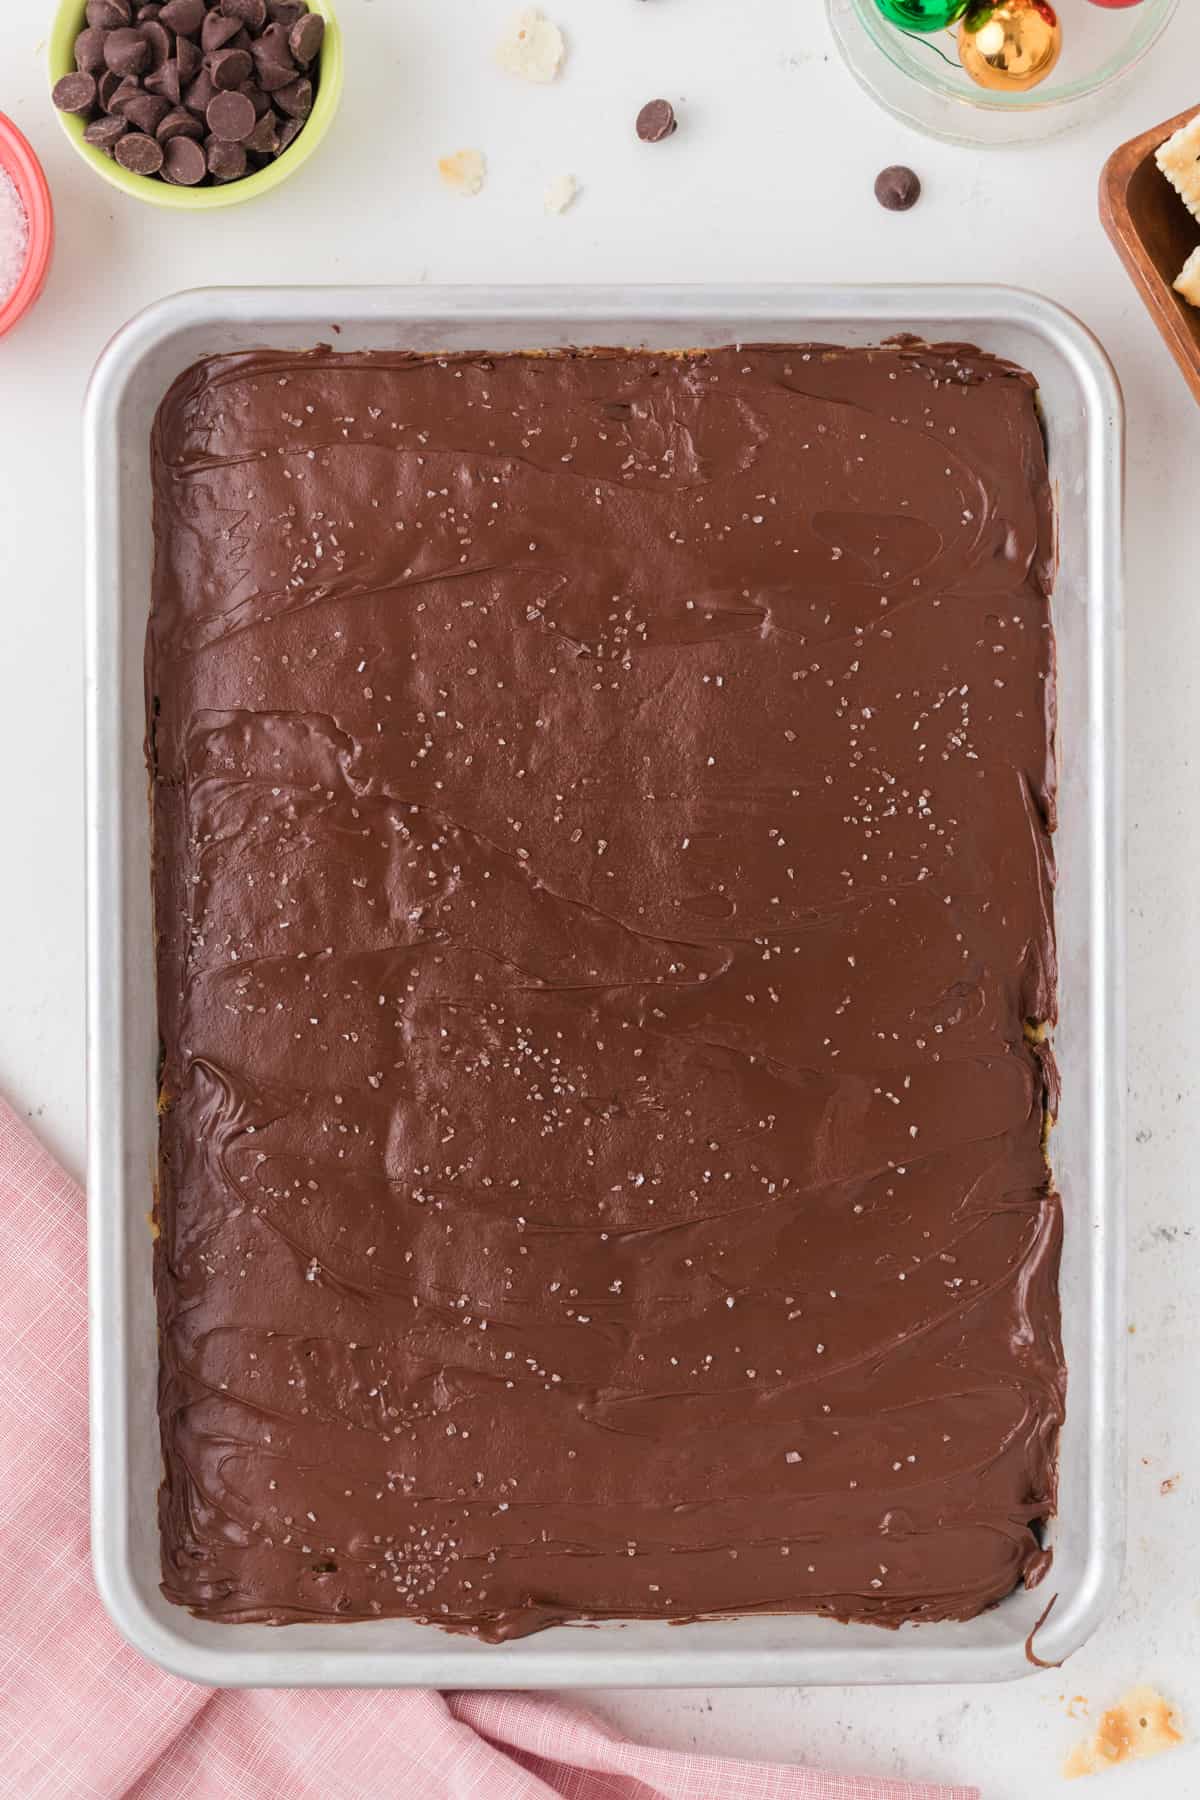 salt added on top of christmas crack on top of the chocolate layer